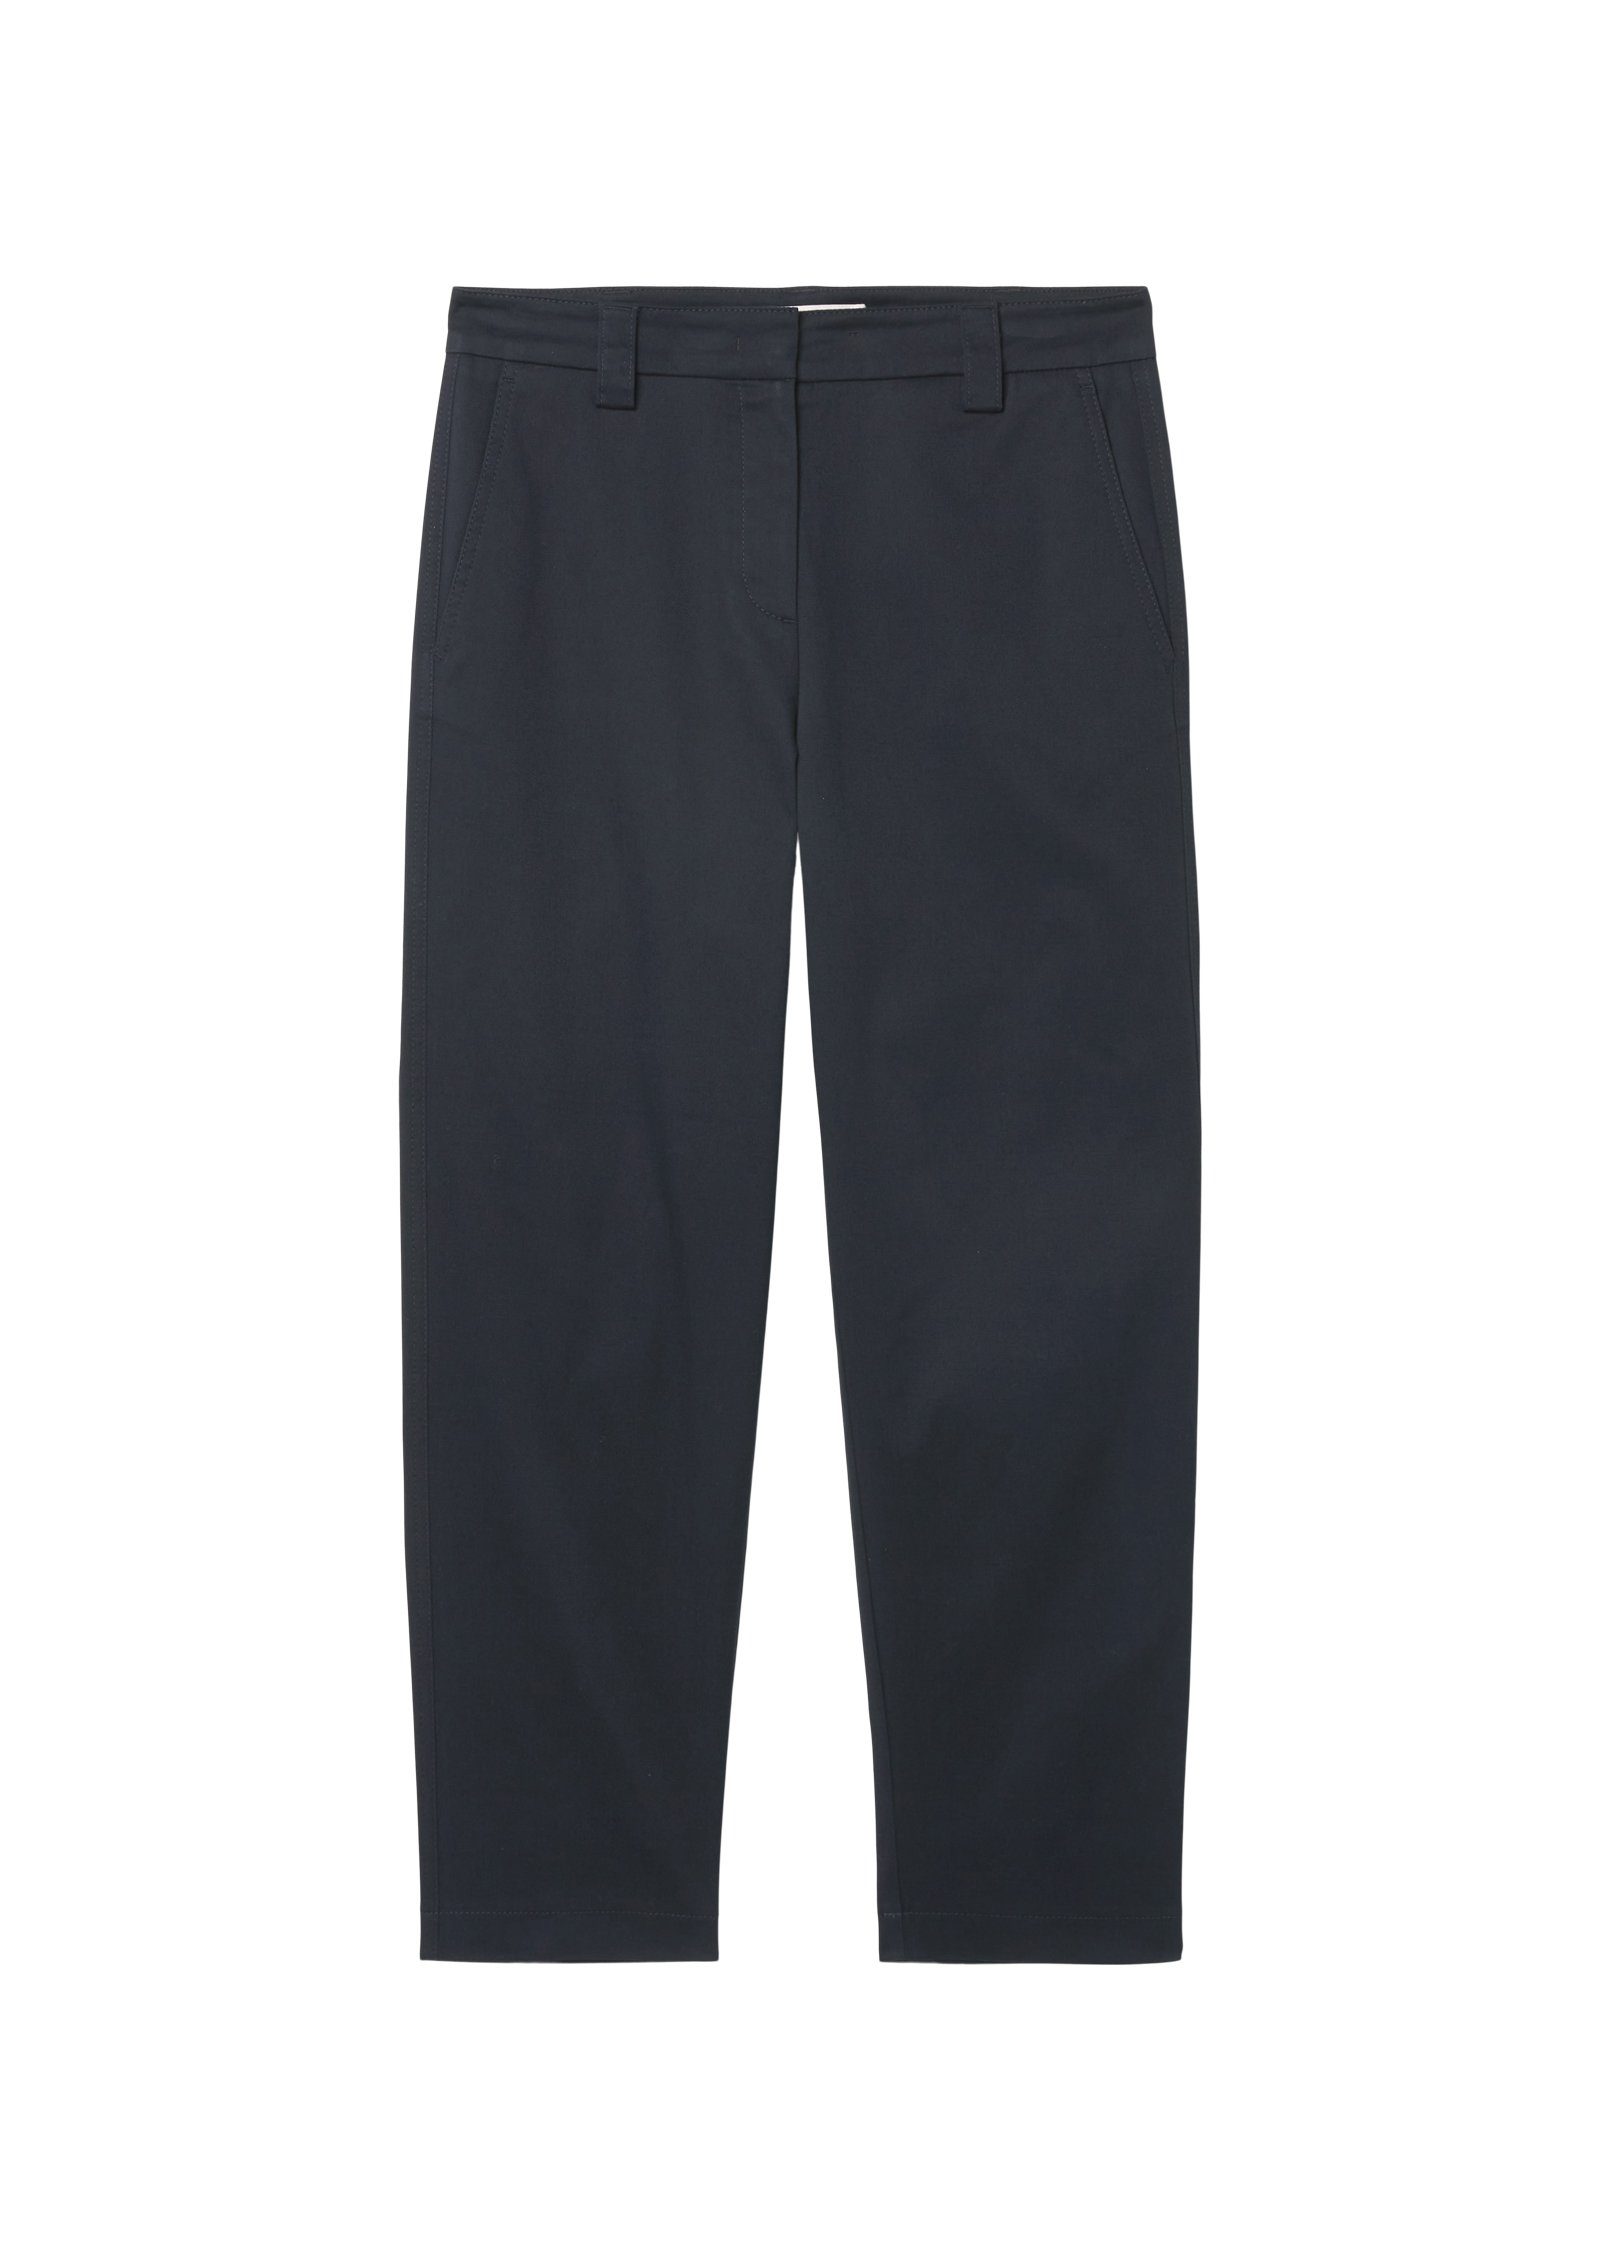 high modern O'Polo 7/8-Hose Marc modernen style, Chino-Style Pants, blue leg, tapered chino welt thunder im rise, pocket